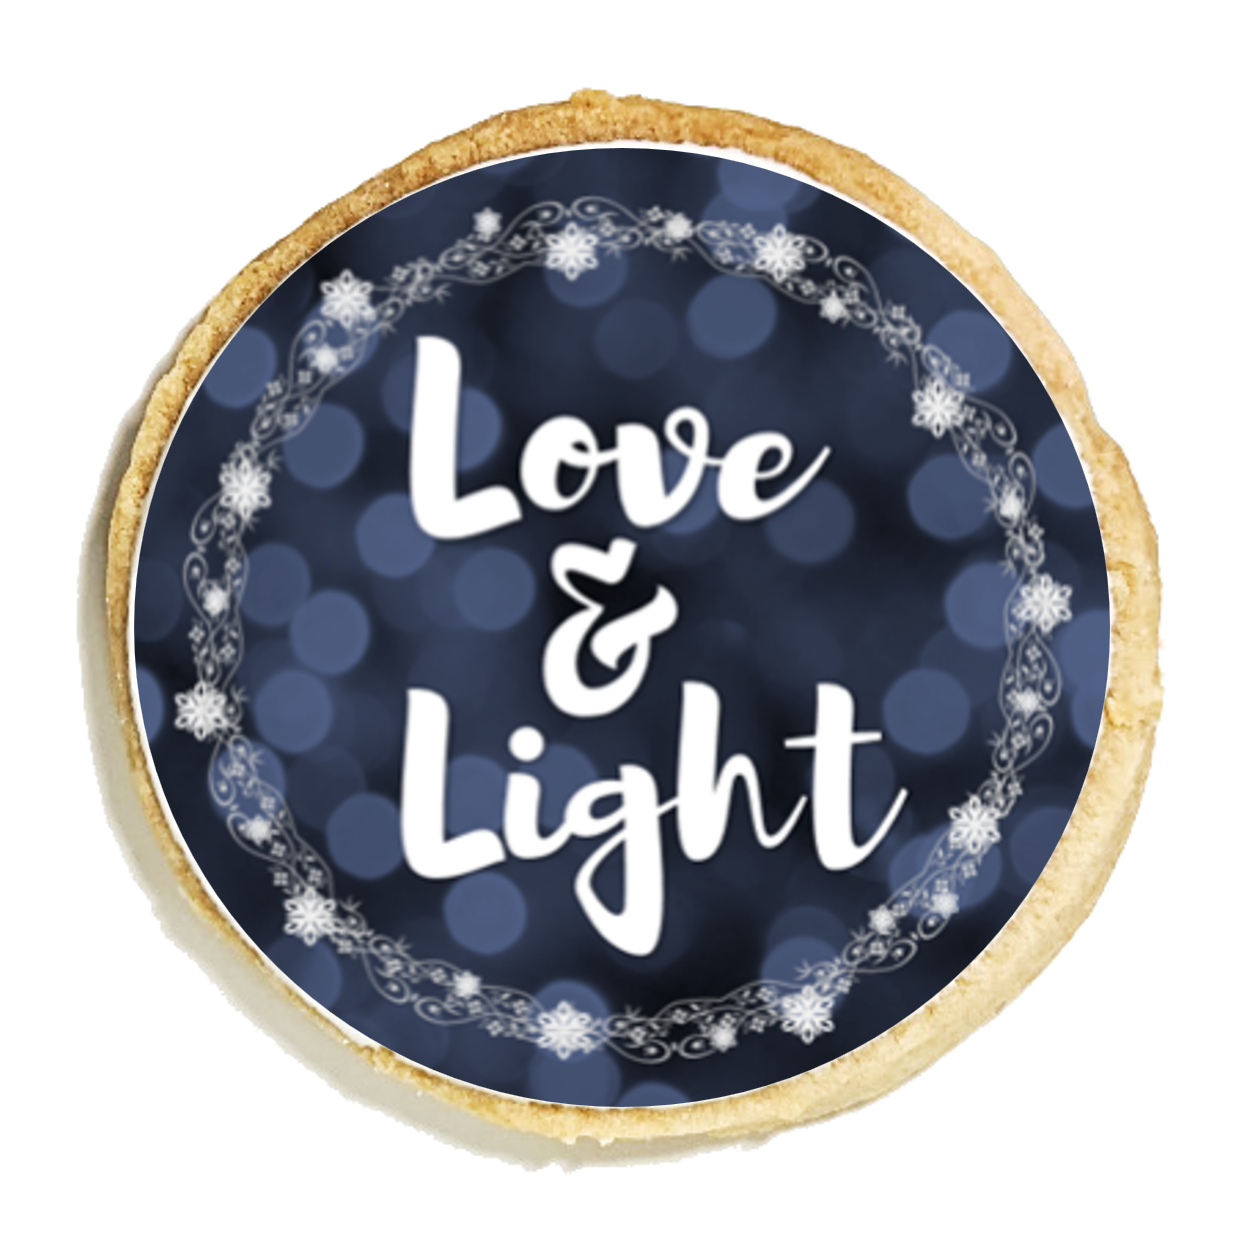 Love and Light Cookies